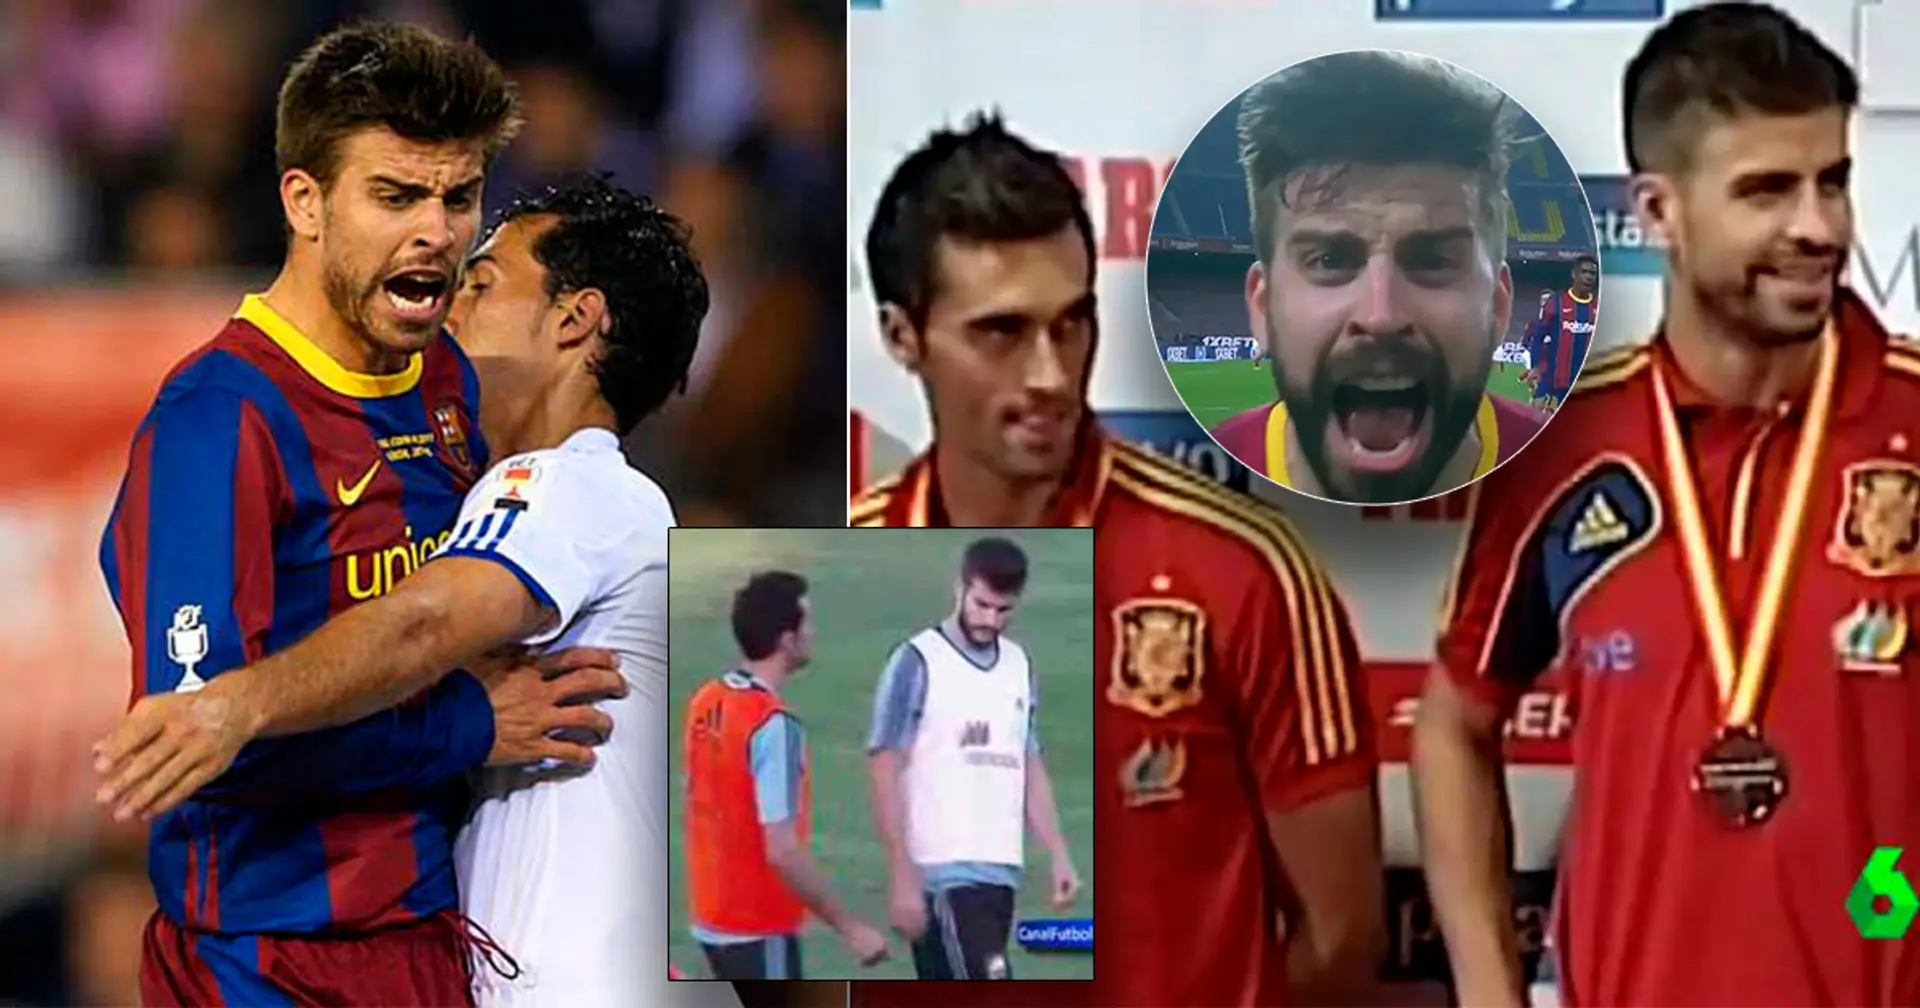 'He's nothing more than an acquaintance': What happened between Pique and Arbeloa that made them hate each other